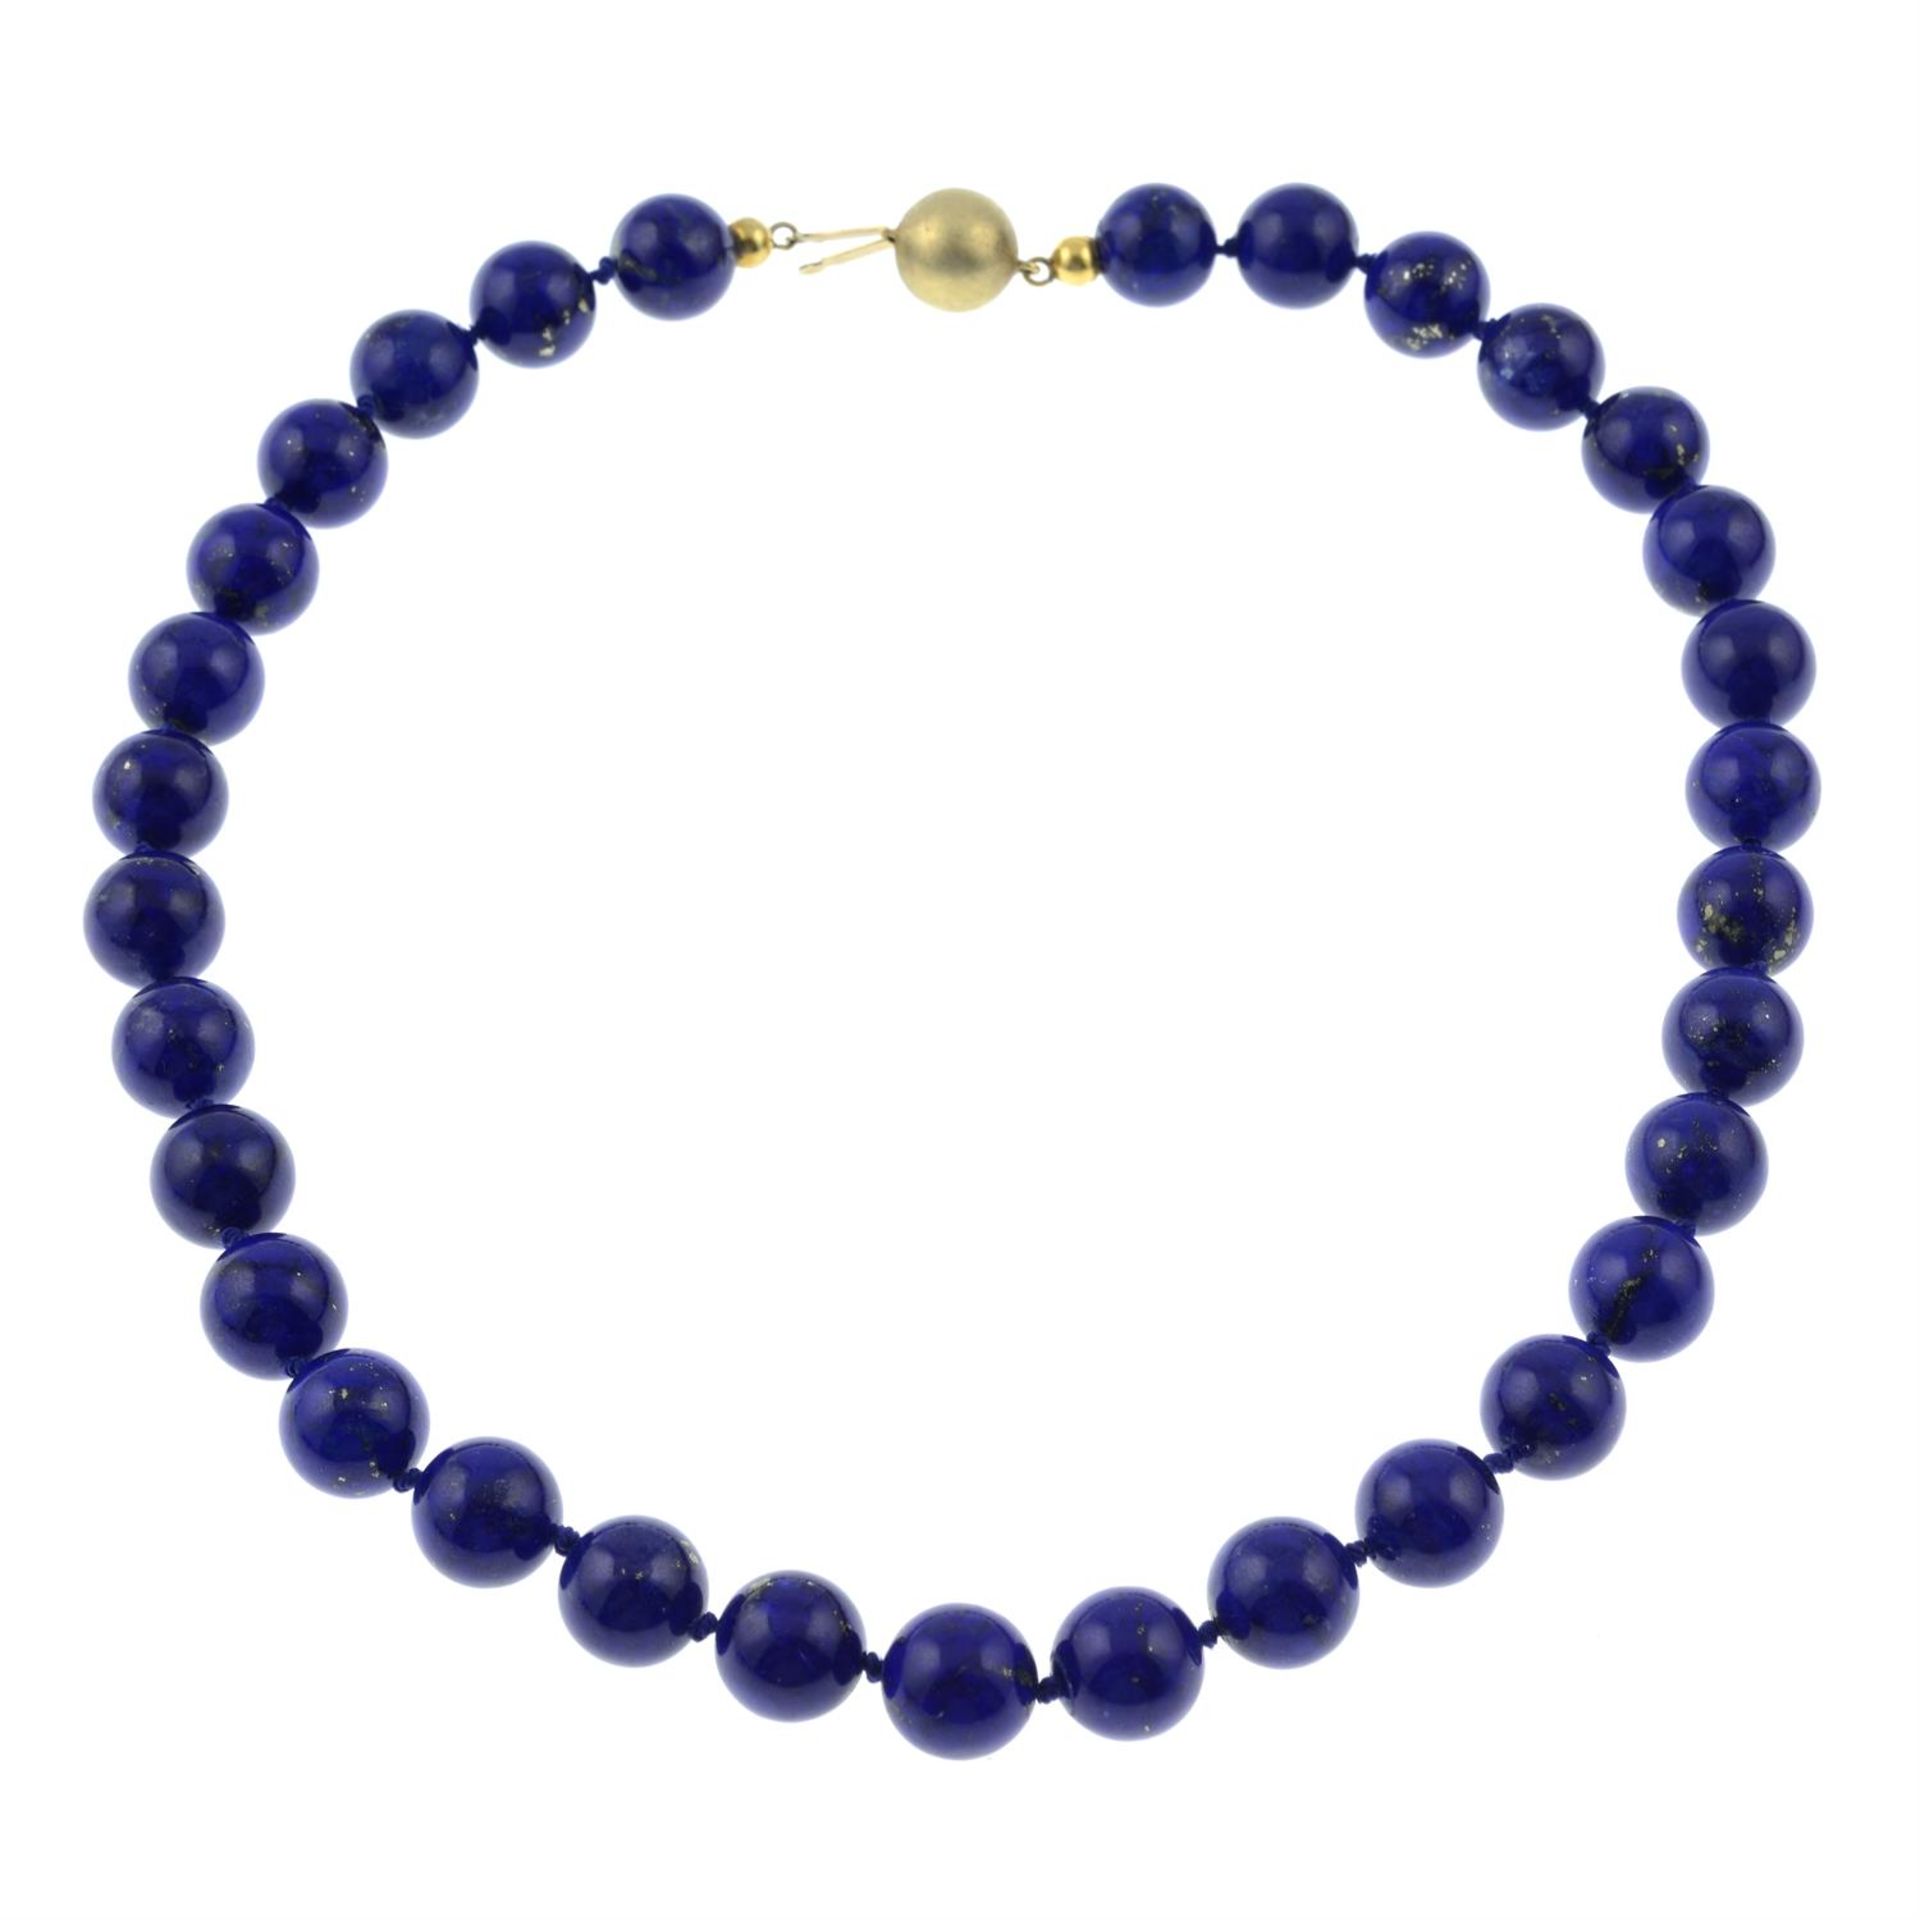 A lapis lazuli single-strand necklace, with spherical push-piece clasp.